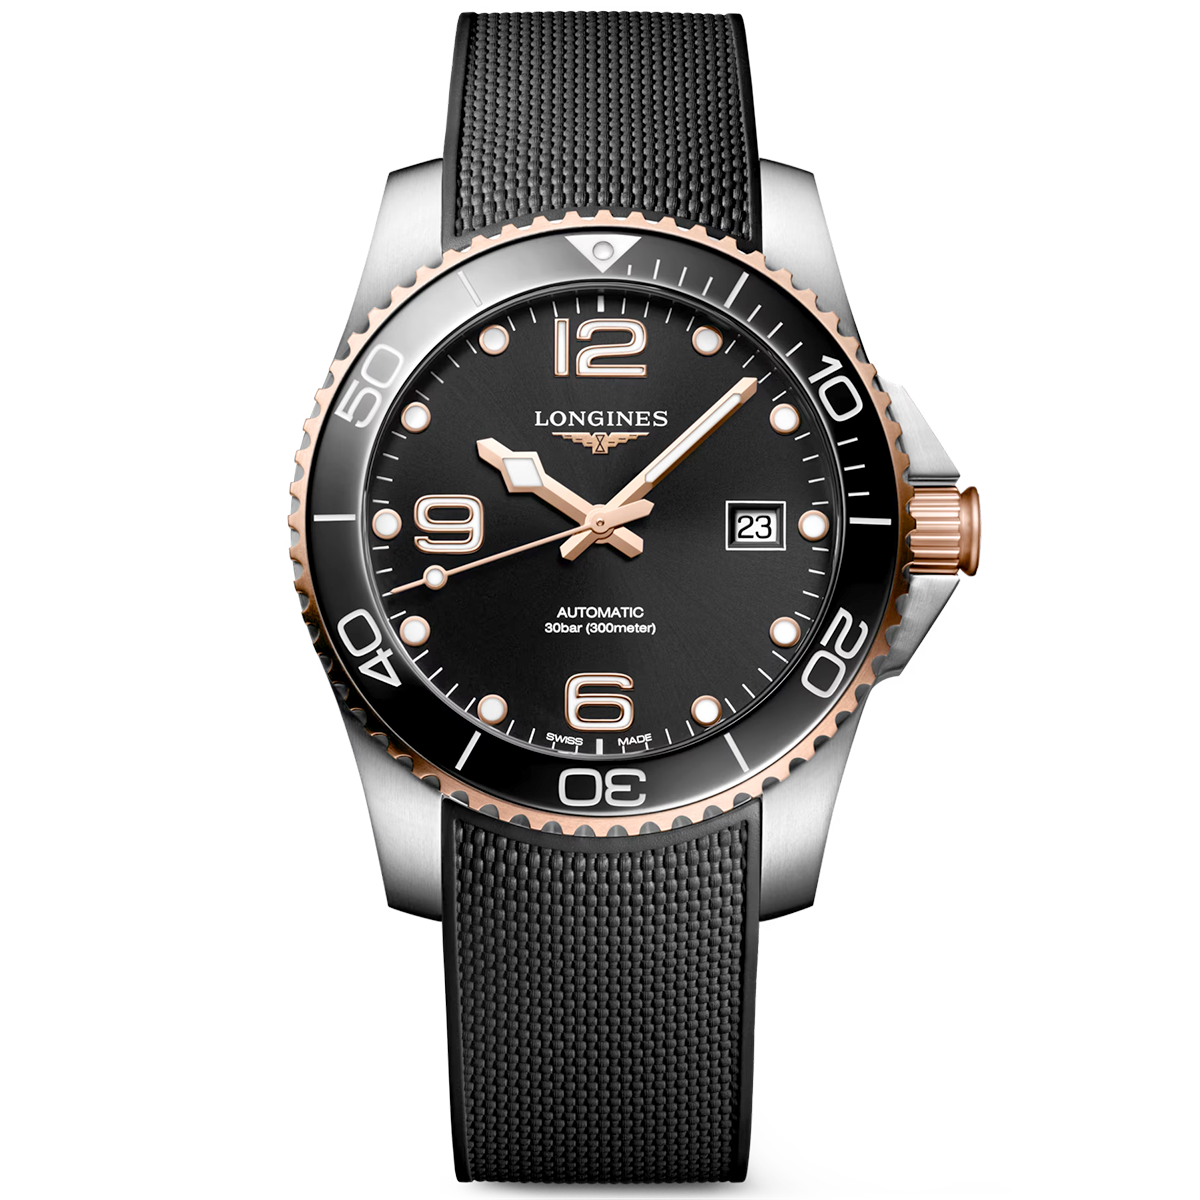 HydroConquest 41mm Two-Tone Black Dial Men's Rubber Strap Watch